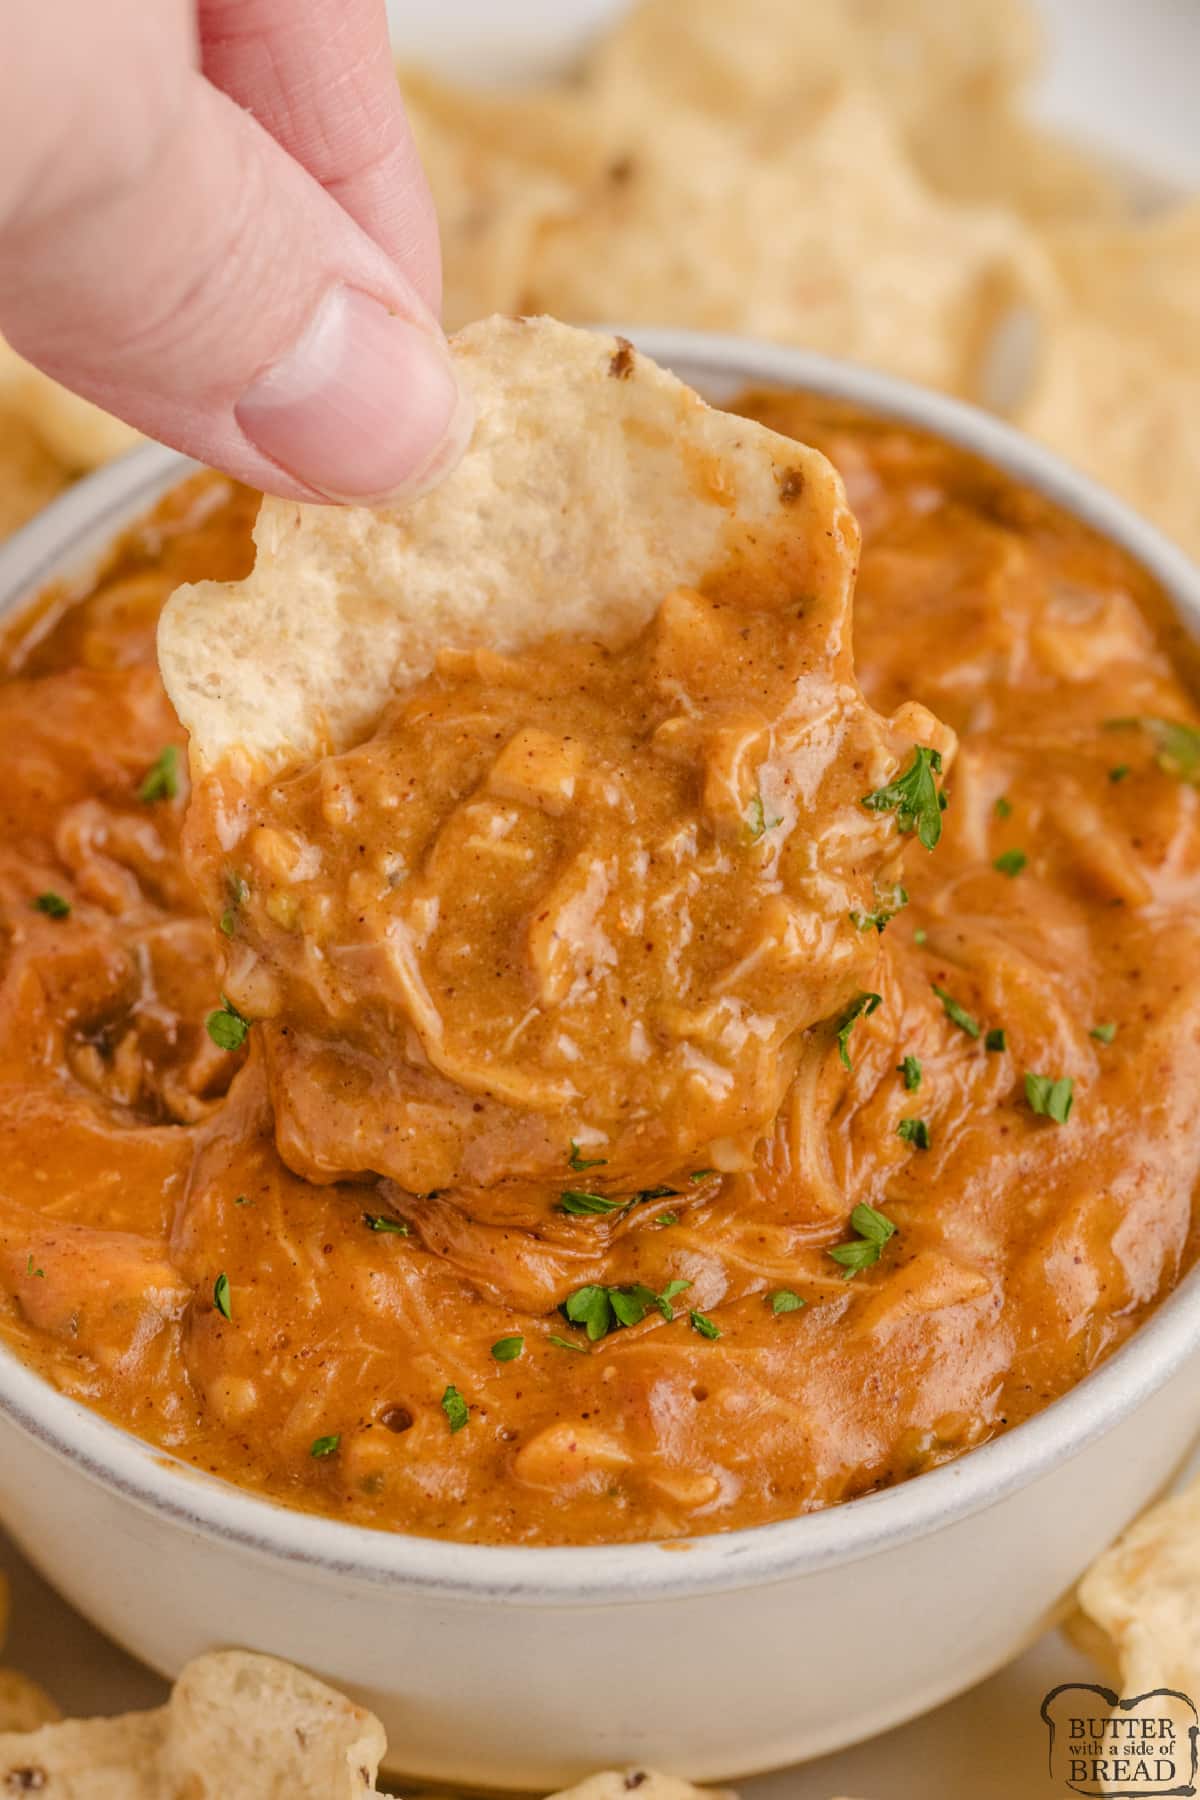 Cheesy Chicken Enchilada Dip is loaded with cheese, chicken, and a little bit of spice too! Add some chips and this is the perfect easy appetizer for a party!